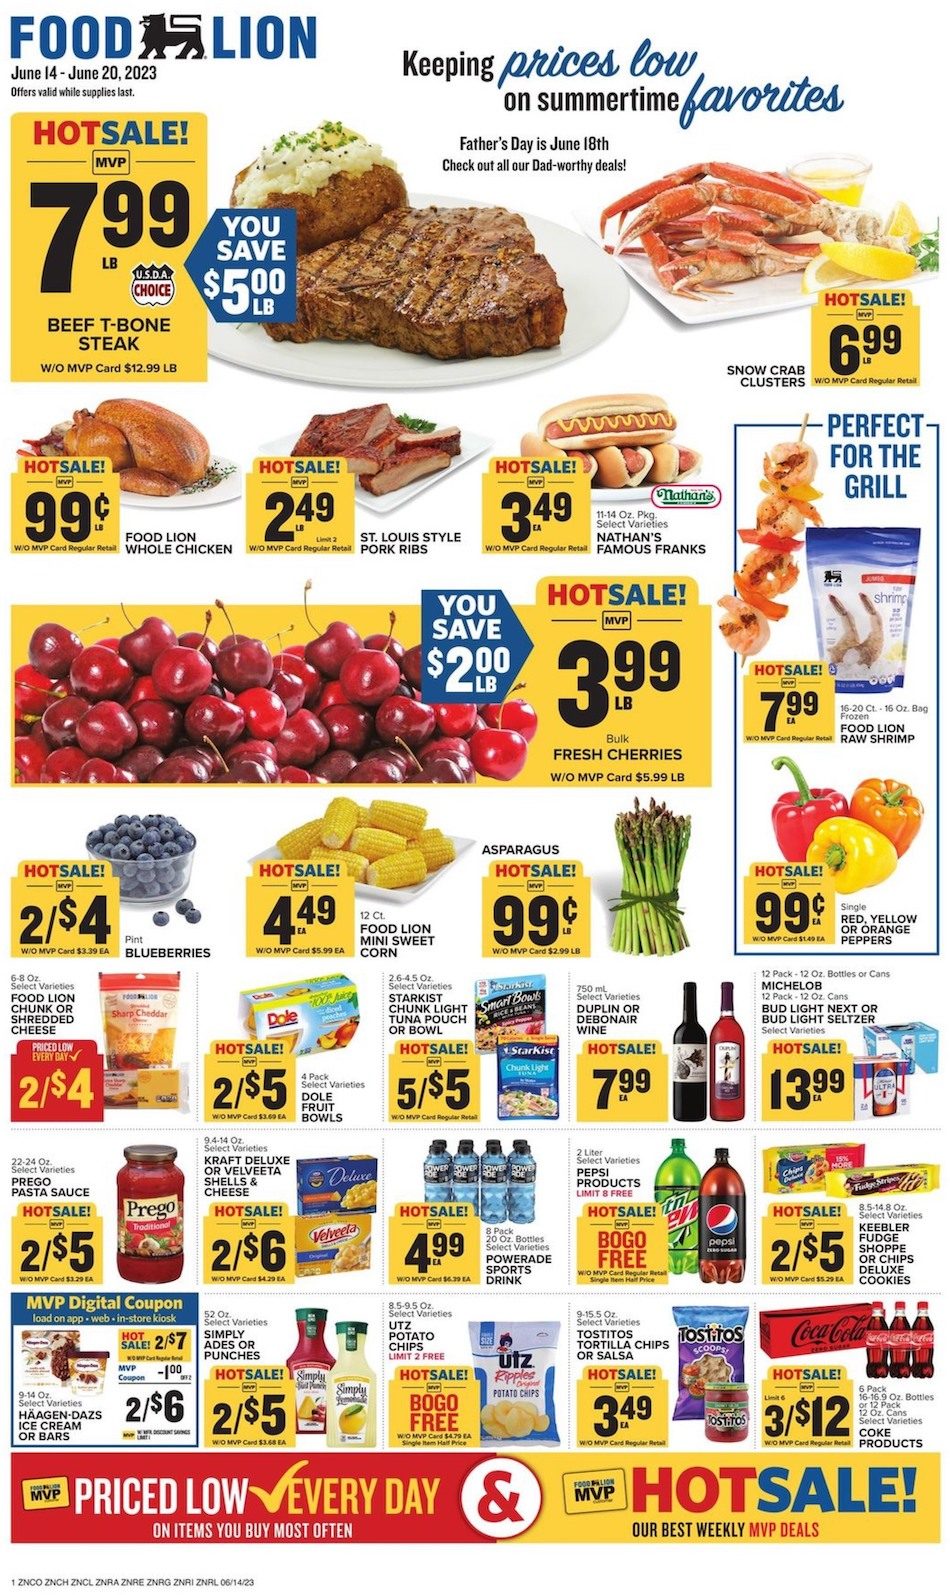 Food Lion Weekly Ad 14th – 20th June 2023 Page 1